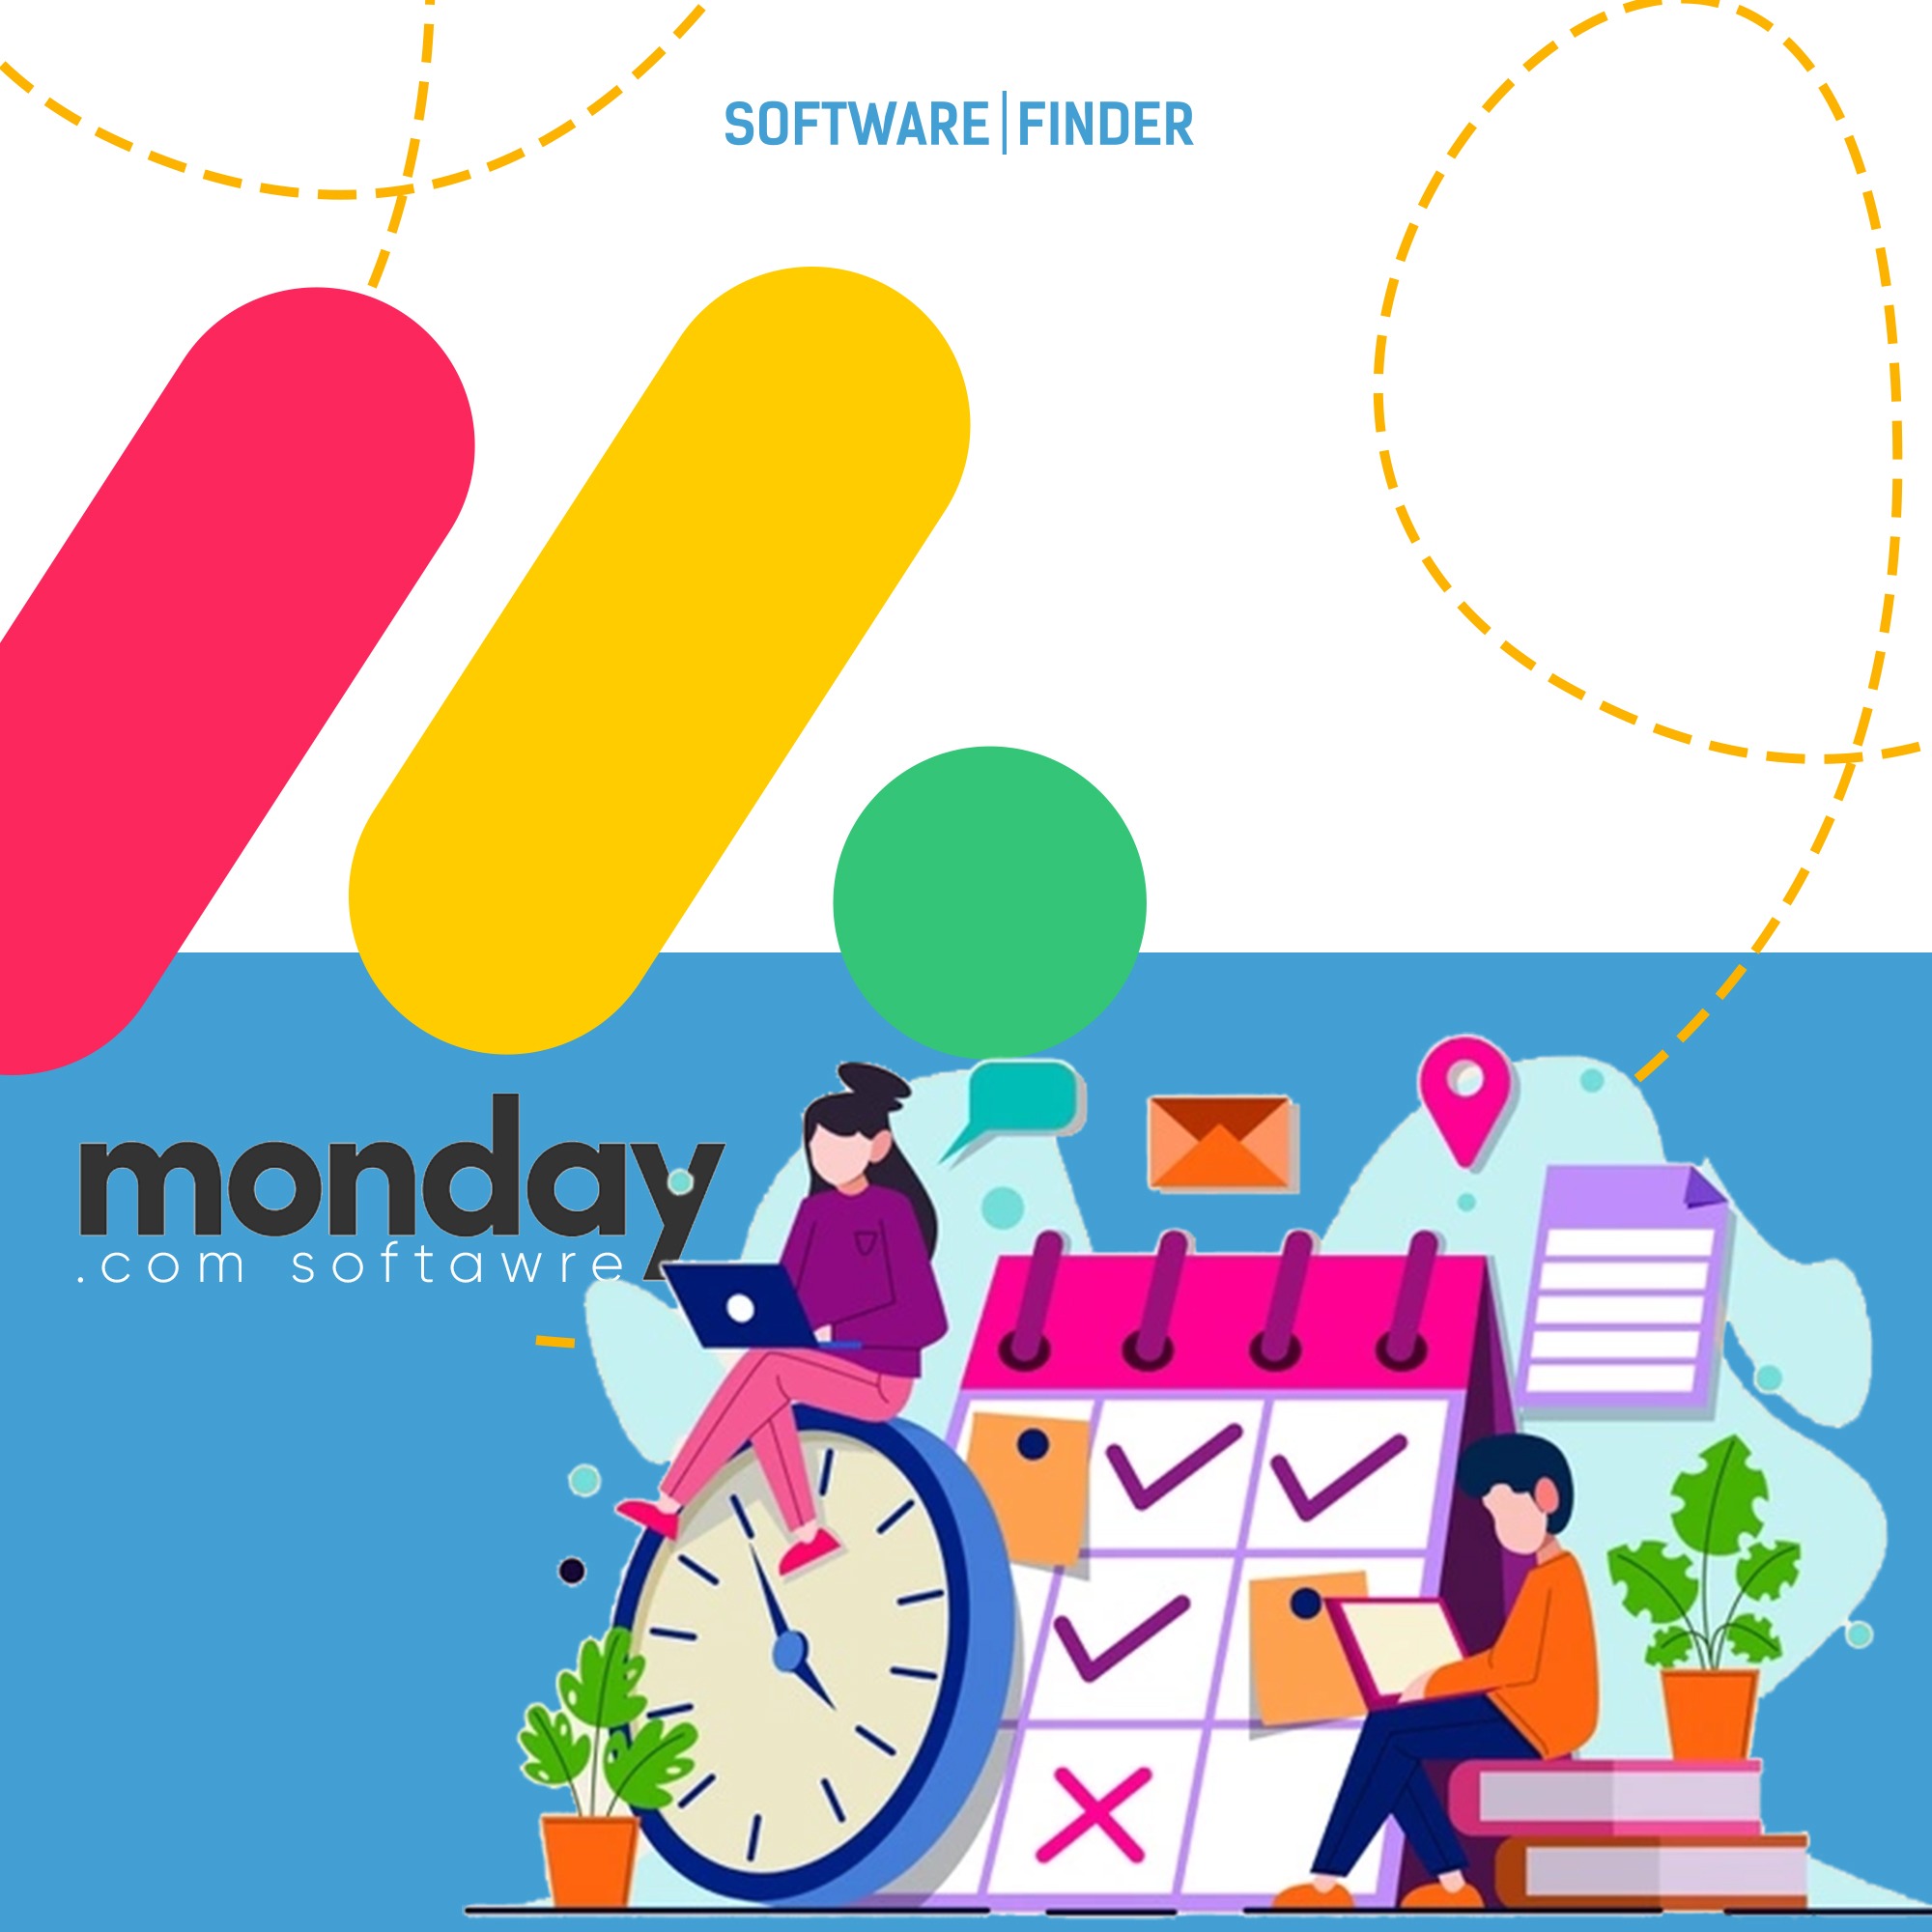 Monday.com - The Simple Software for Your Project Management